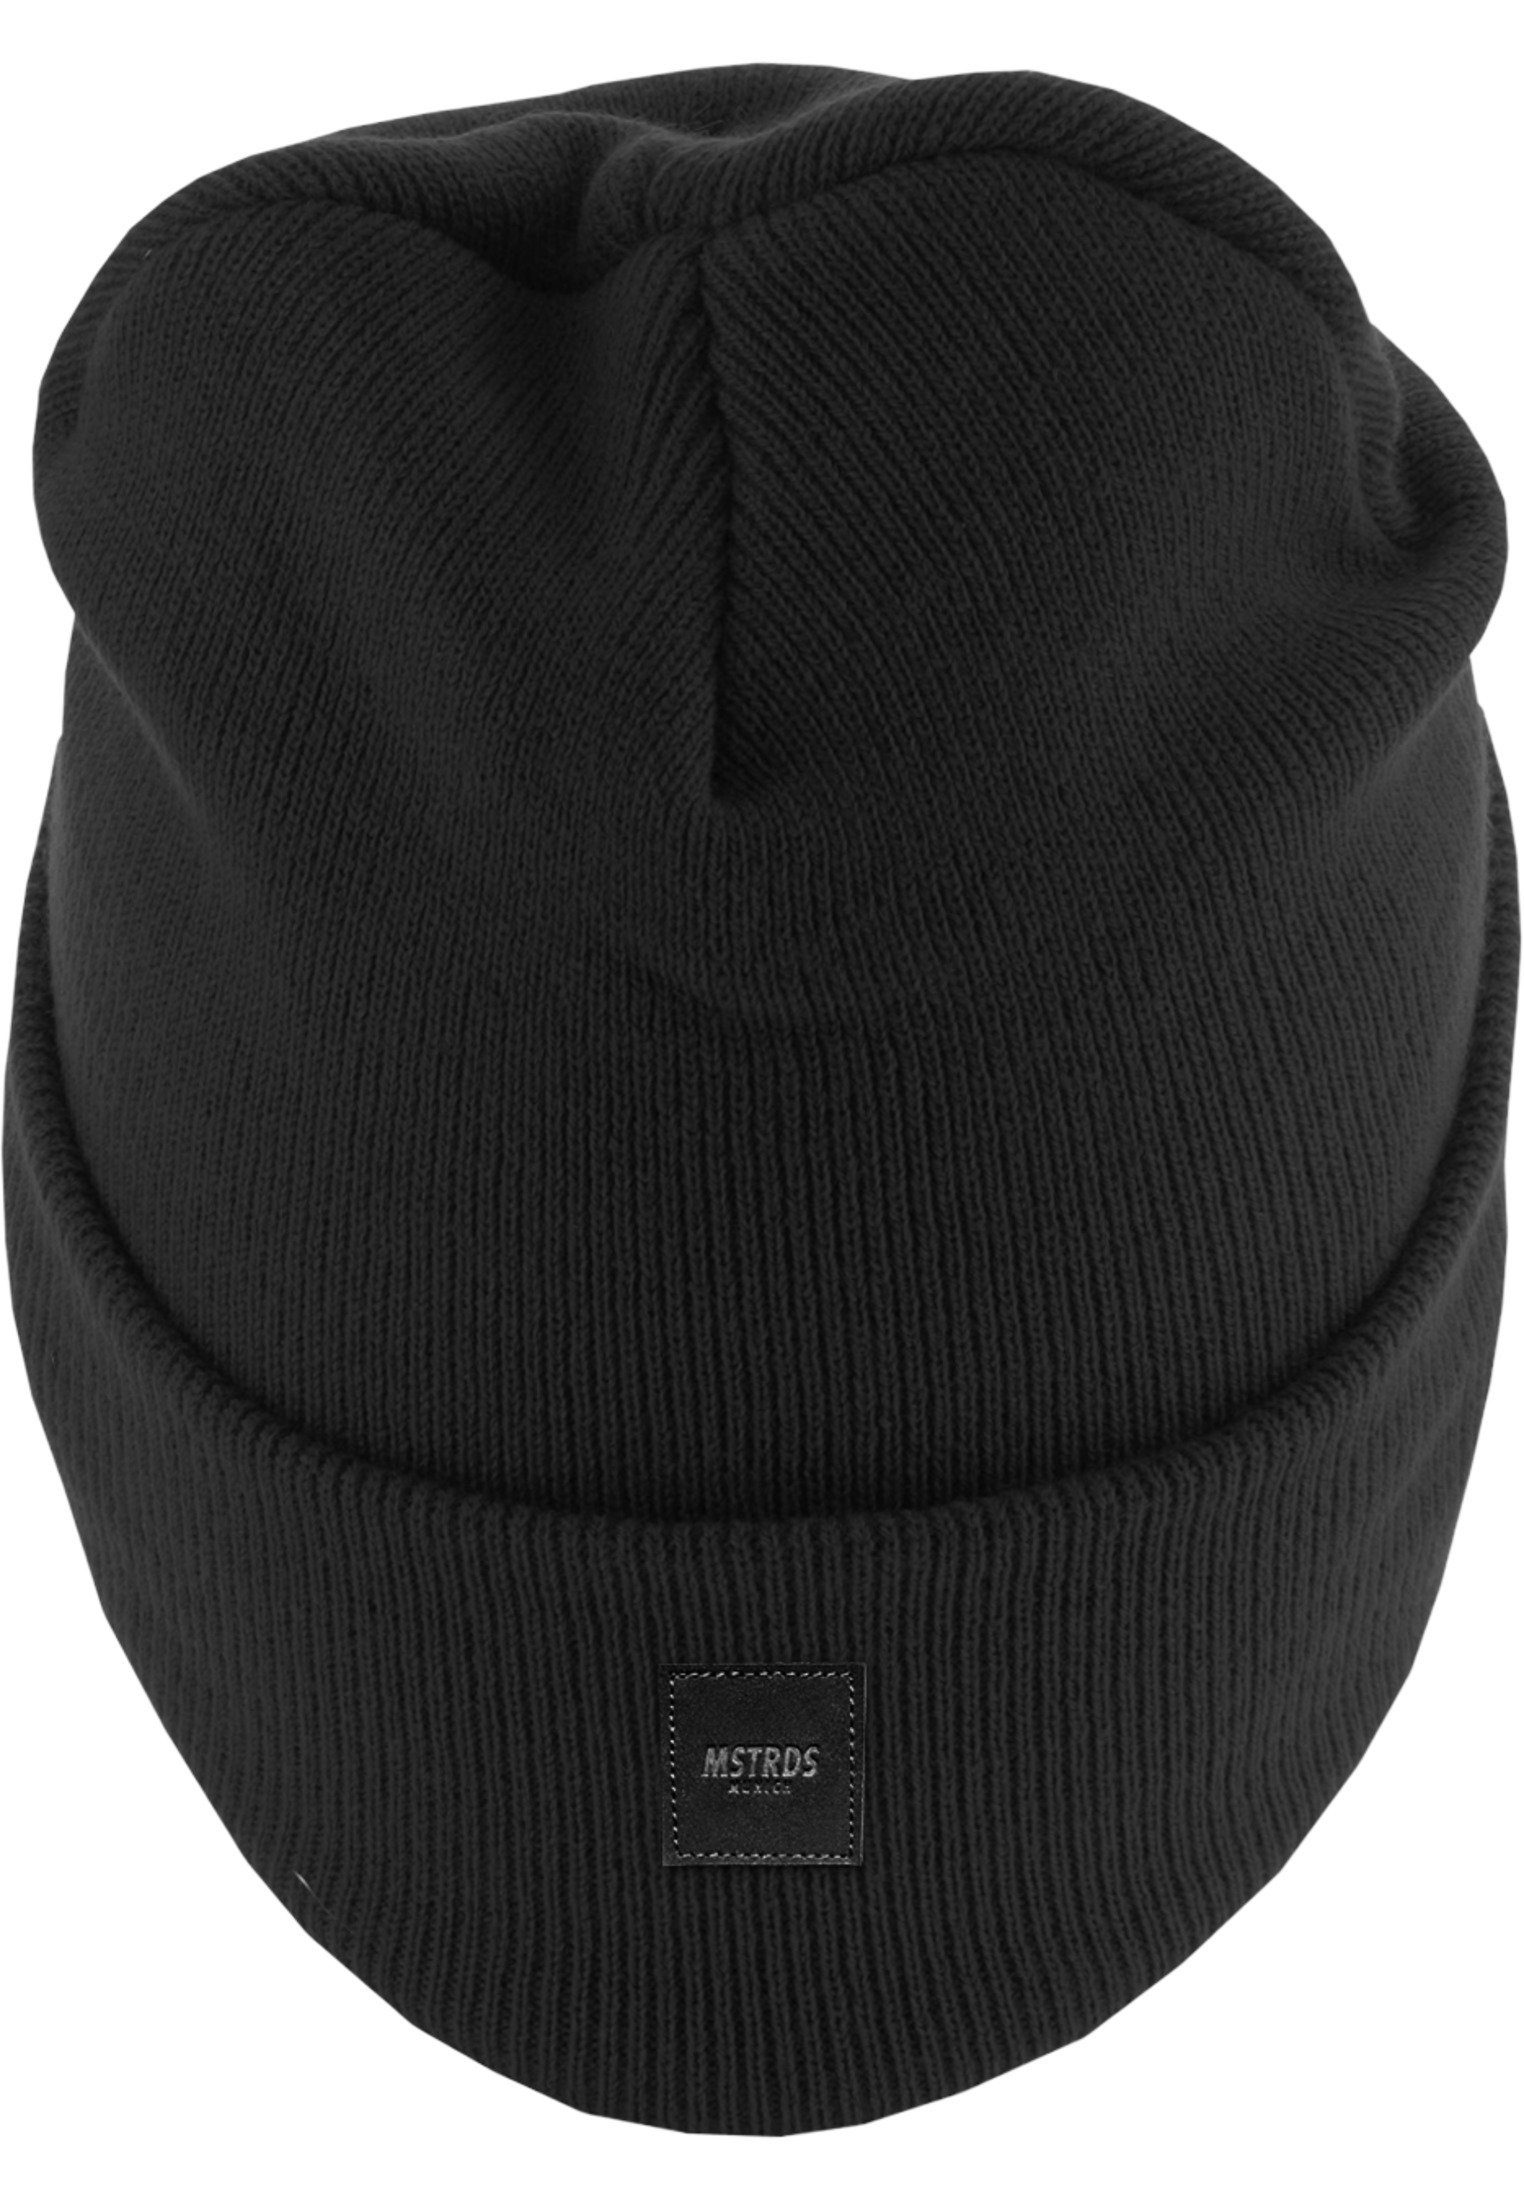 MSTRDS Accessoires Beanie Letter Knit Cuff (1-St) Beanie